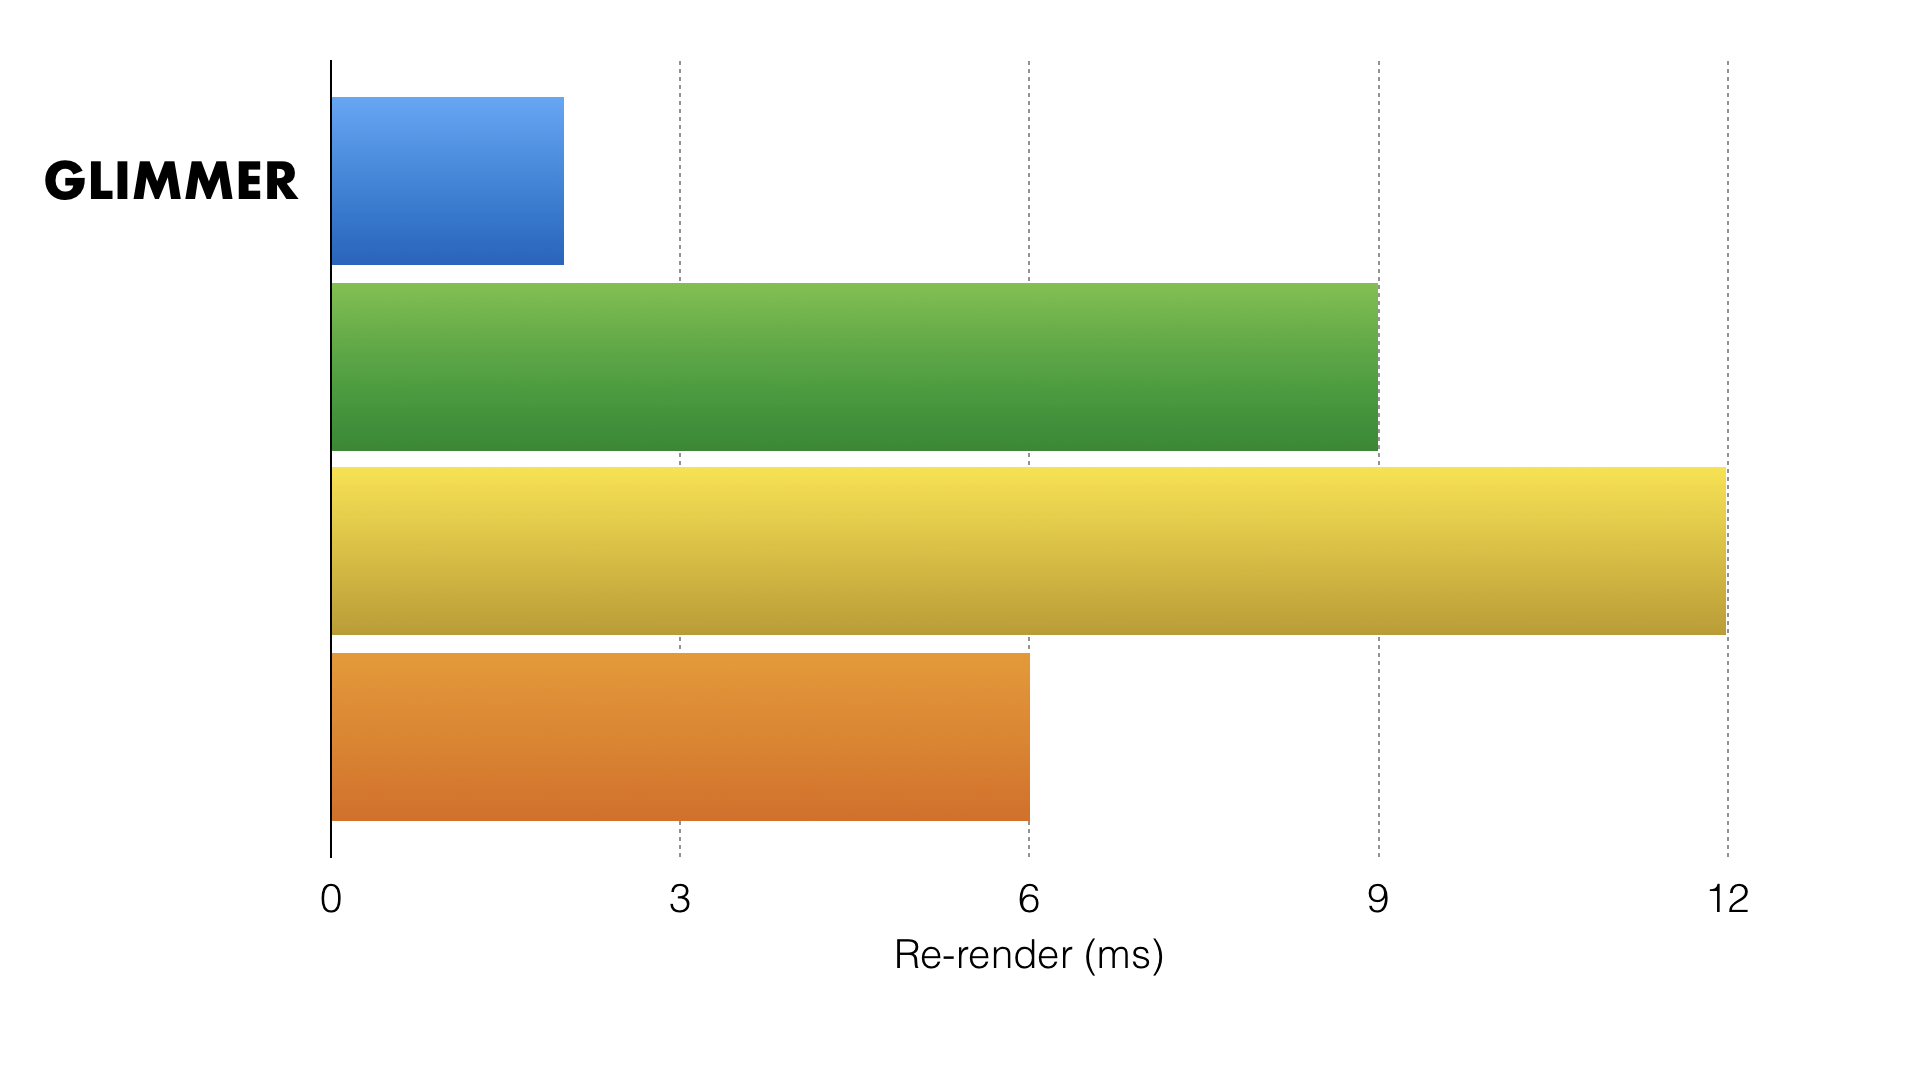 Chart showing rerendering performance where Glimmer is significantly faster.